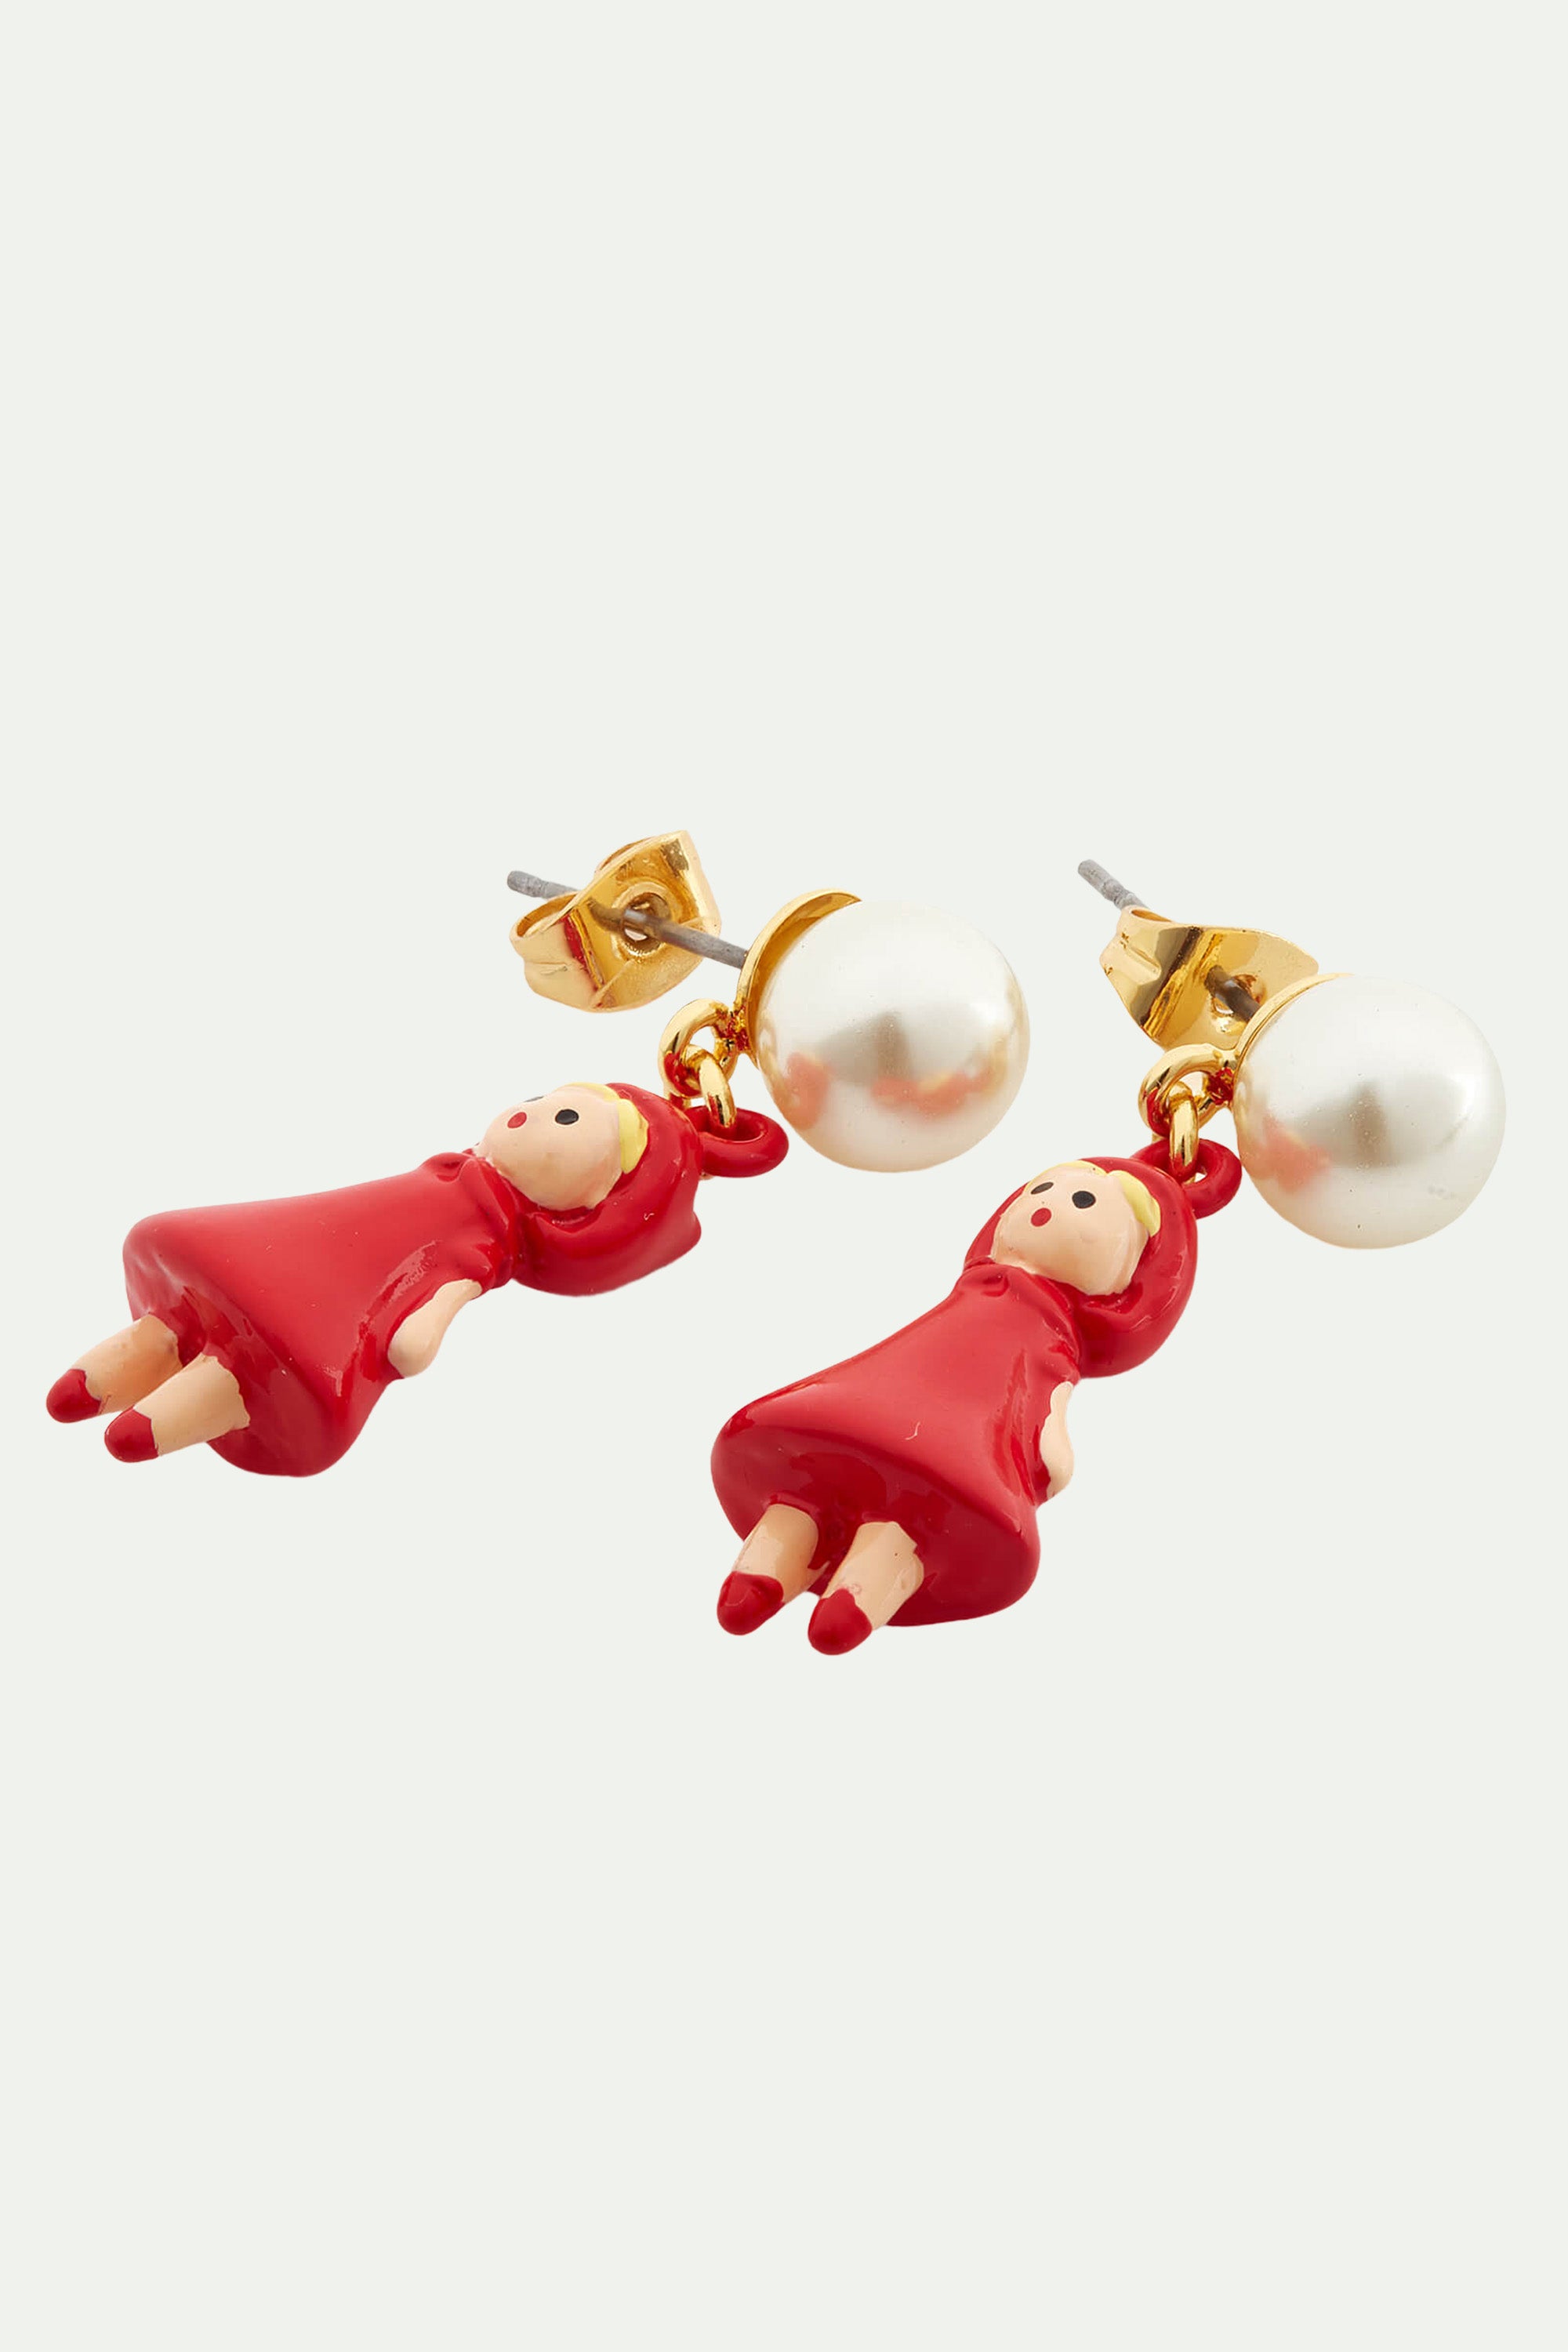 Pearl and Little Red Riding Hood clip-on earrings